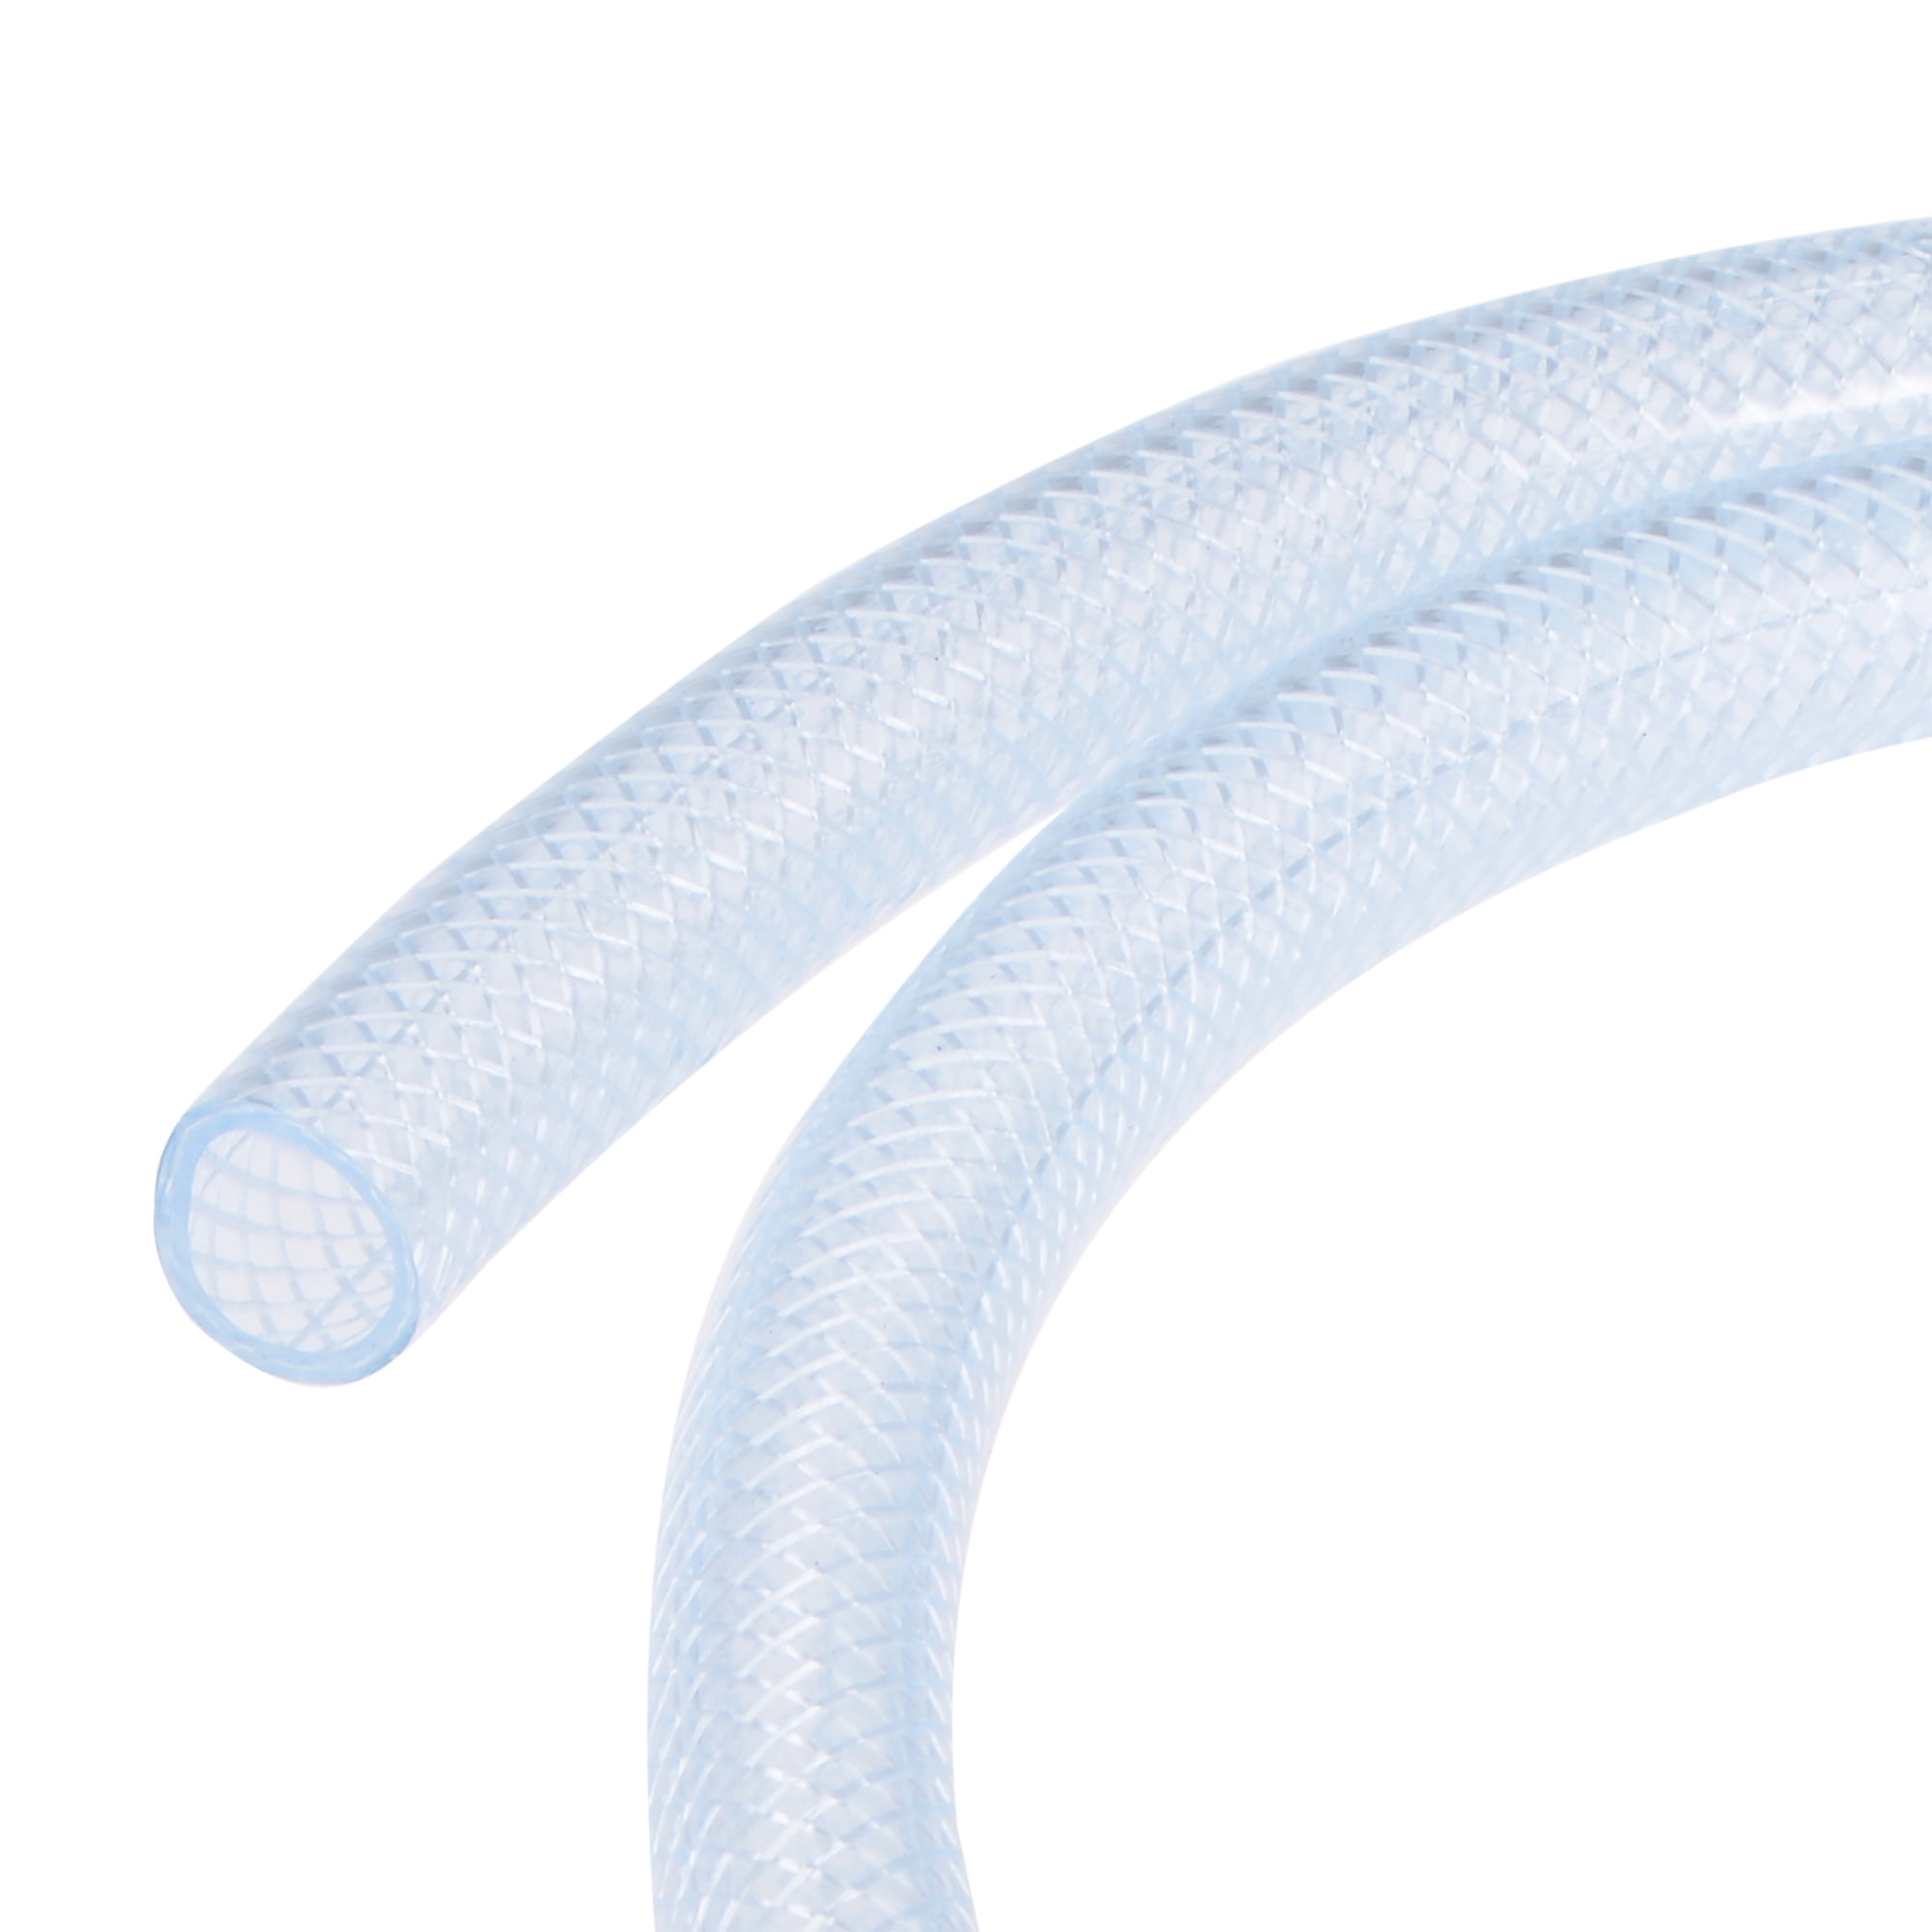 REINFORCED TUBE 9.5mm 3/8" CLEAR PVC BRAIDED HOSE,FOOD GRADE OIL WATER GASES 